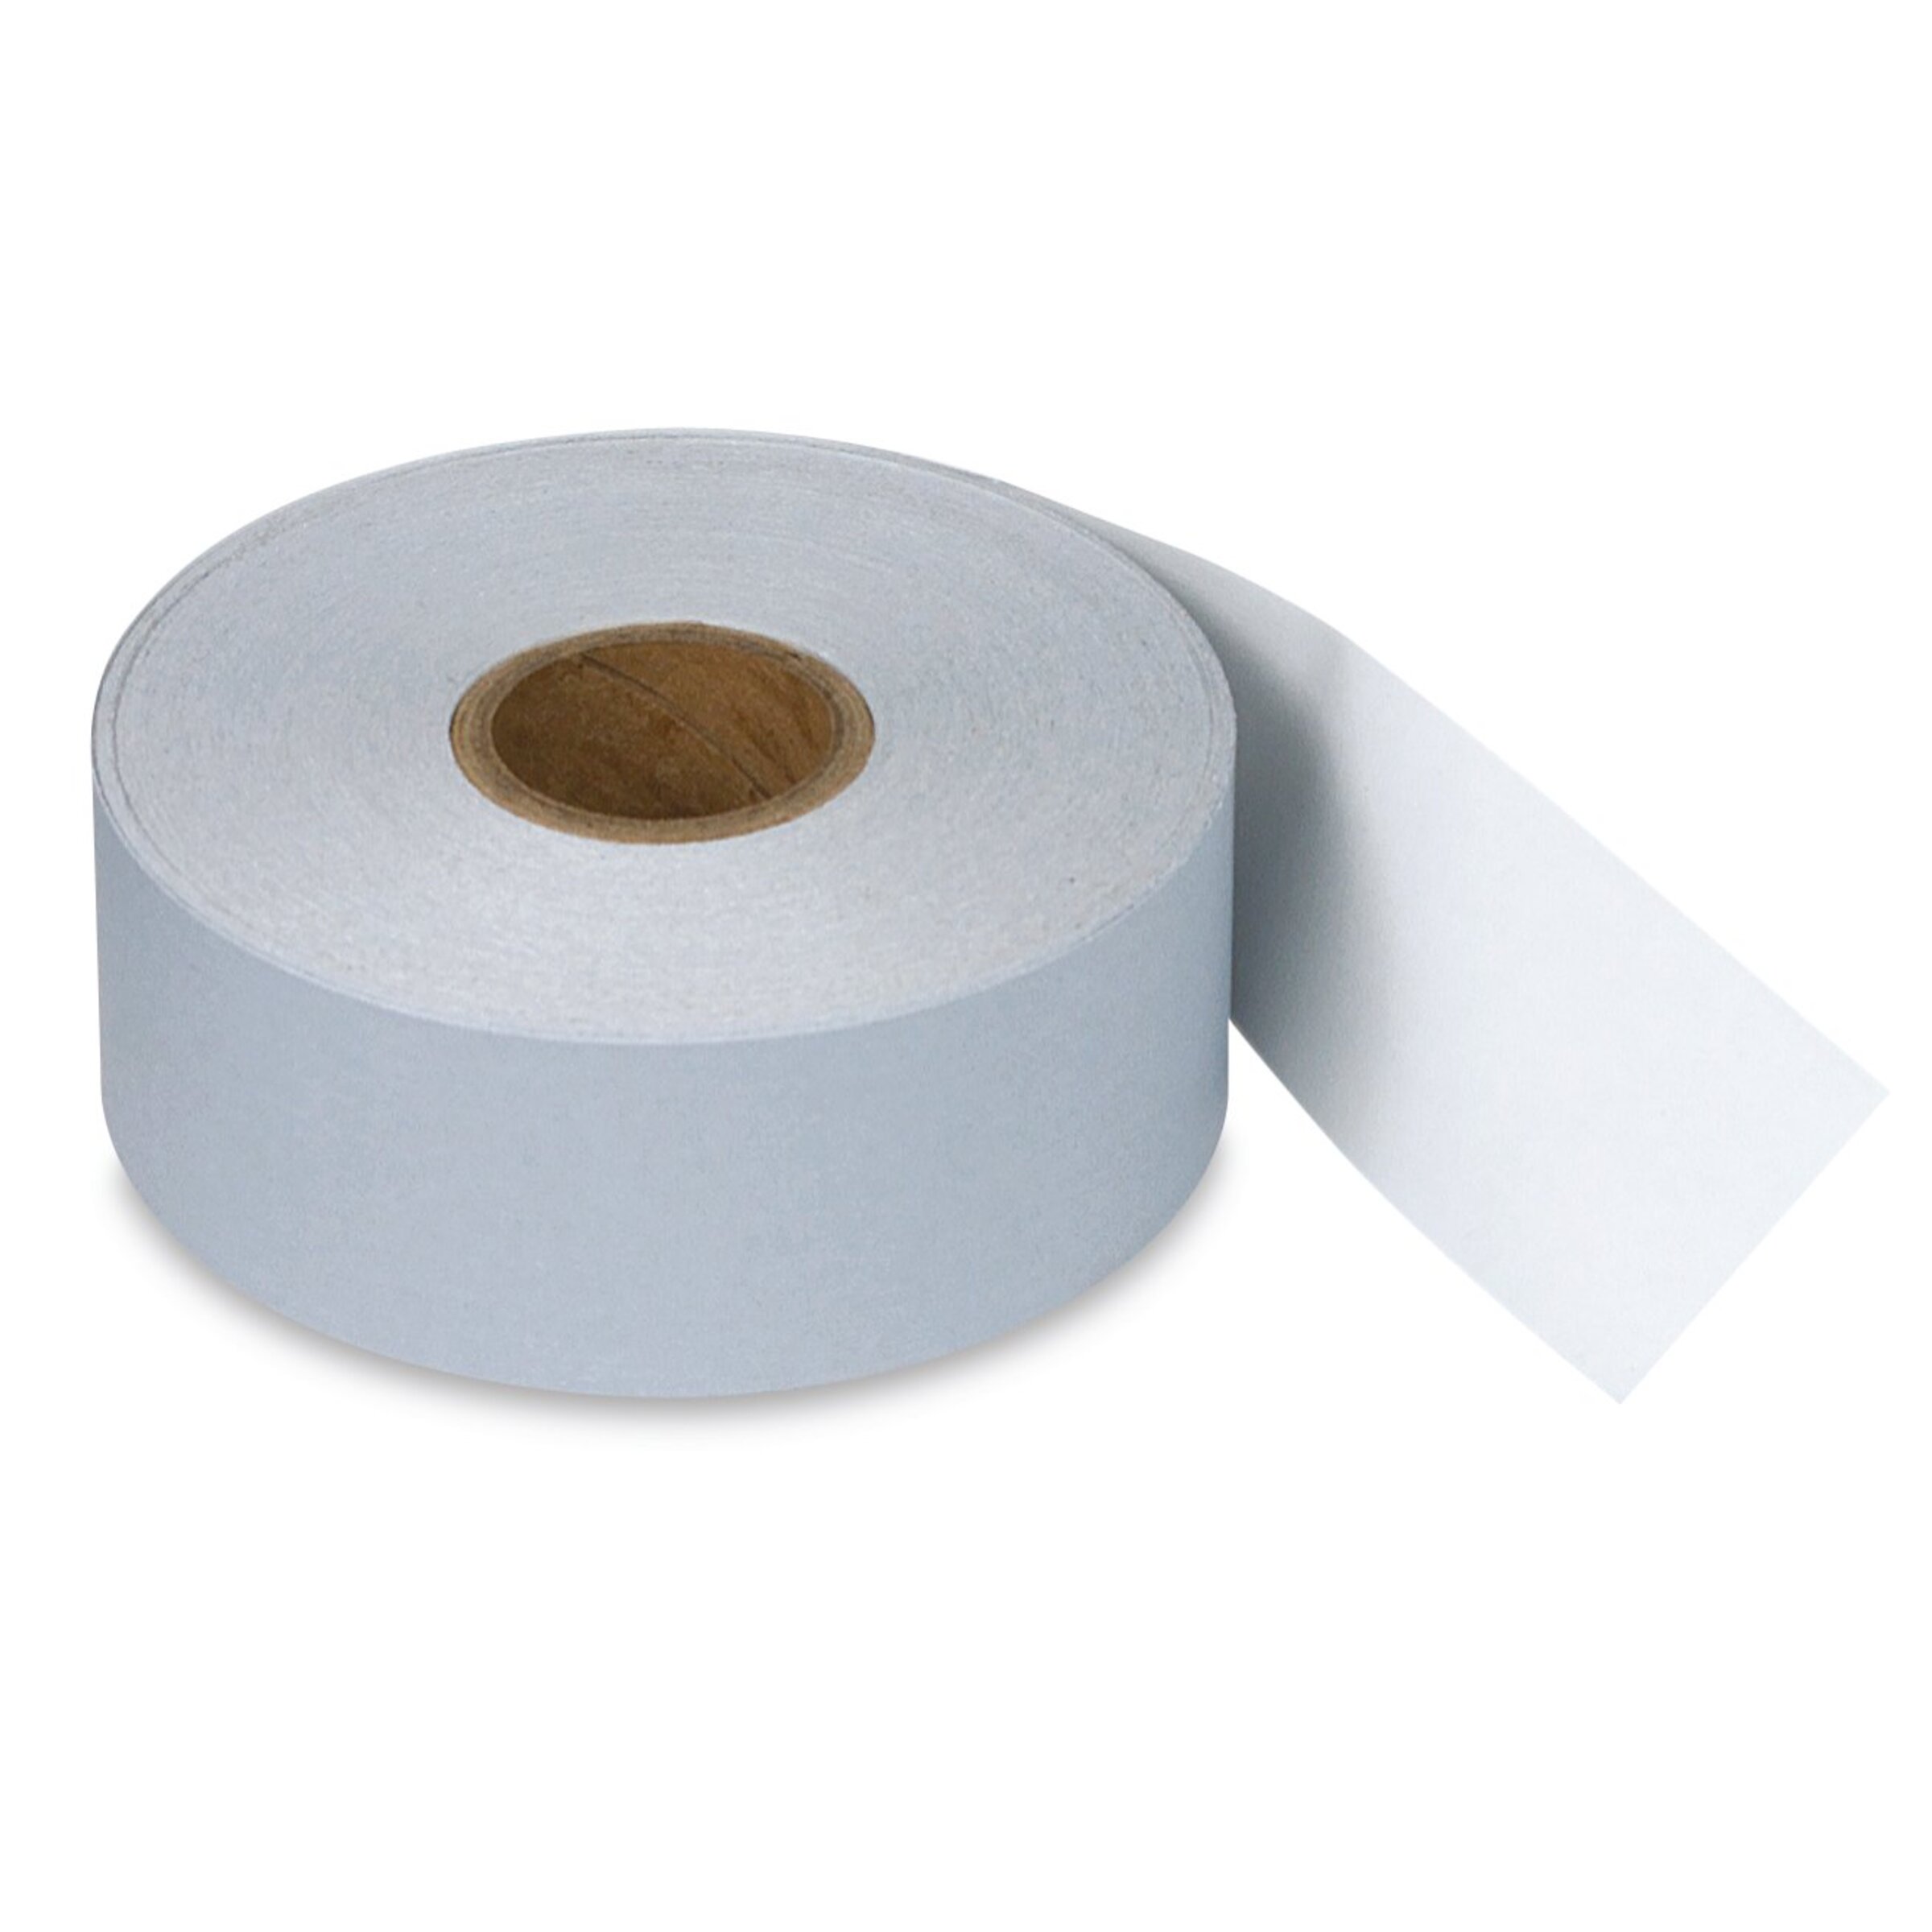 Lineco Frame Sealing Tape - 3-1/4 x 85 ft, Gray